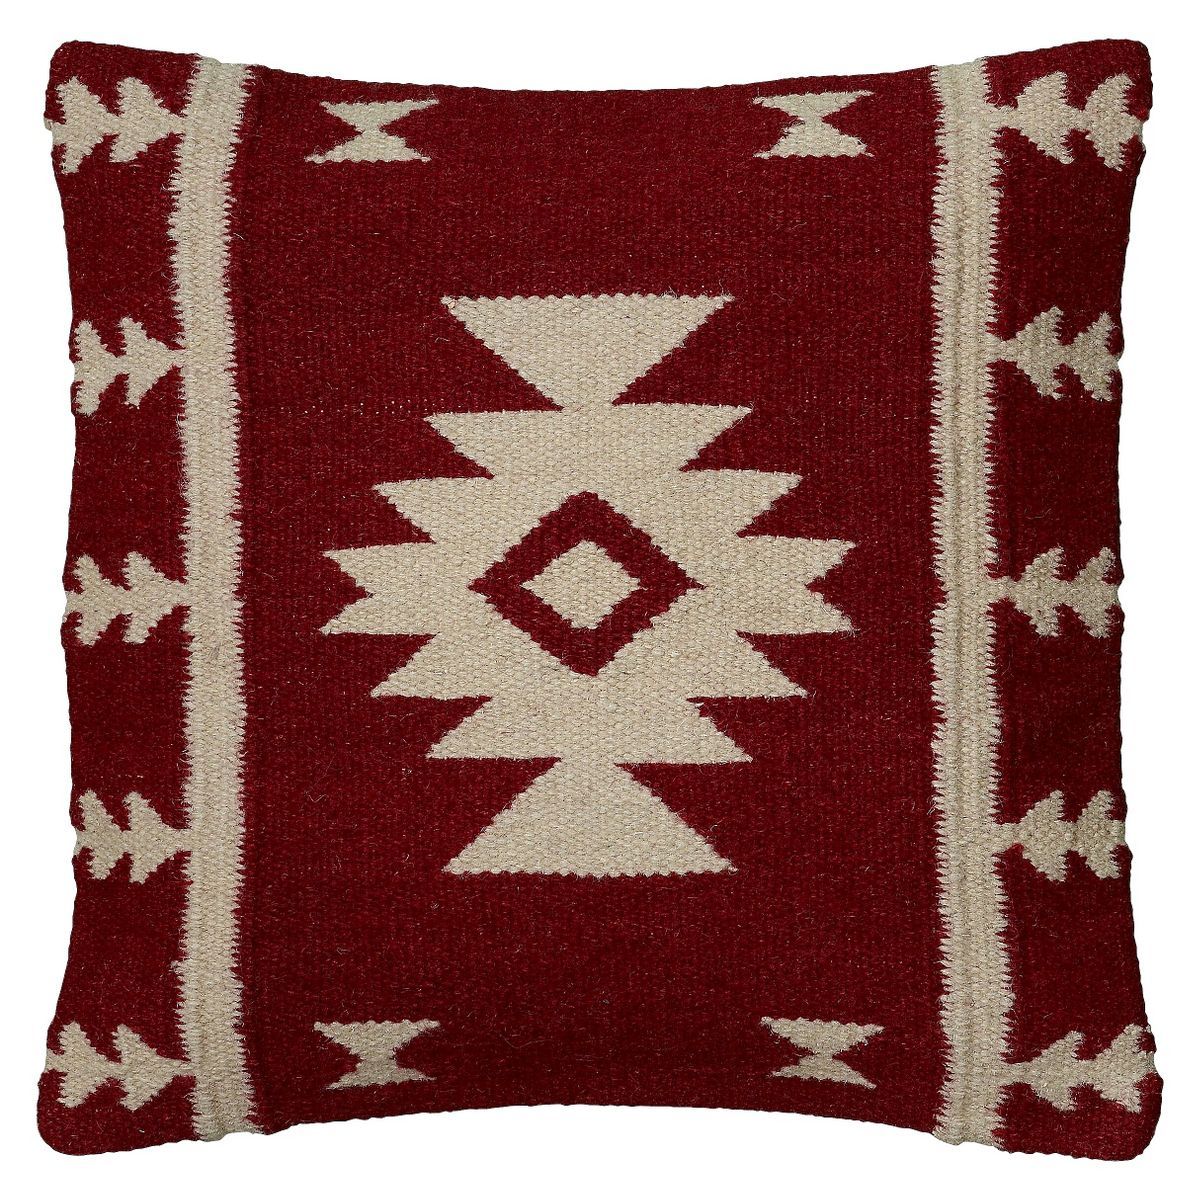 18"x18" Southwestern Striped Square Throw Pillow Red/Ivory - Rizzy Home | Target